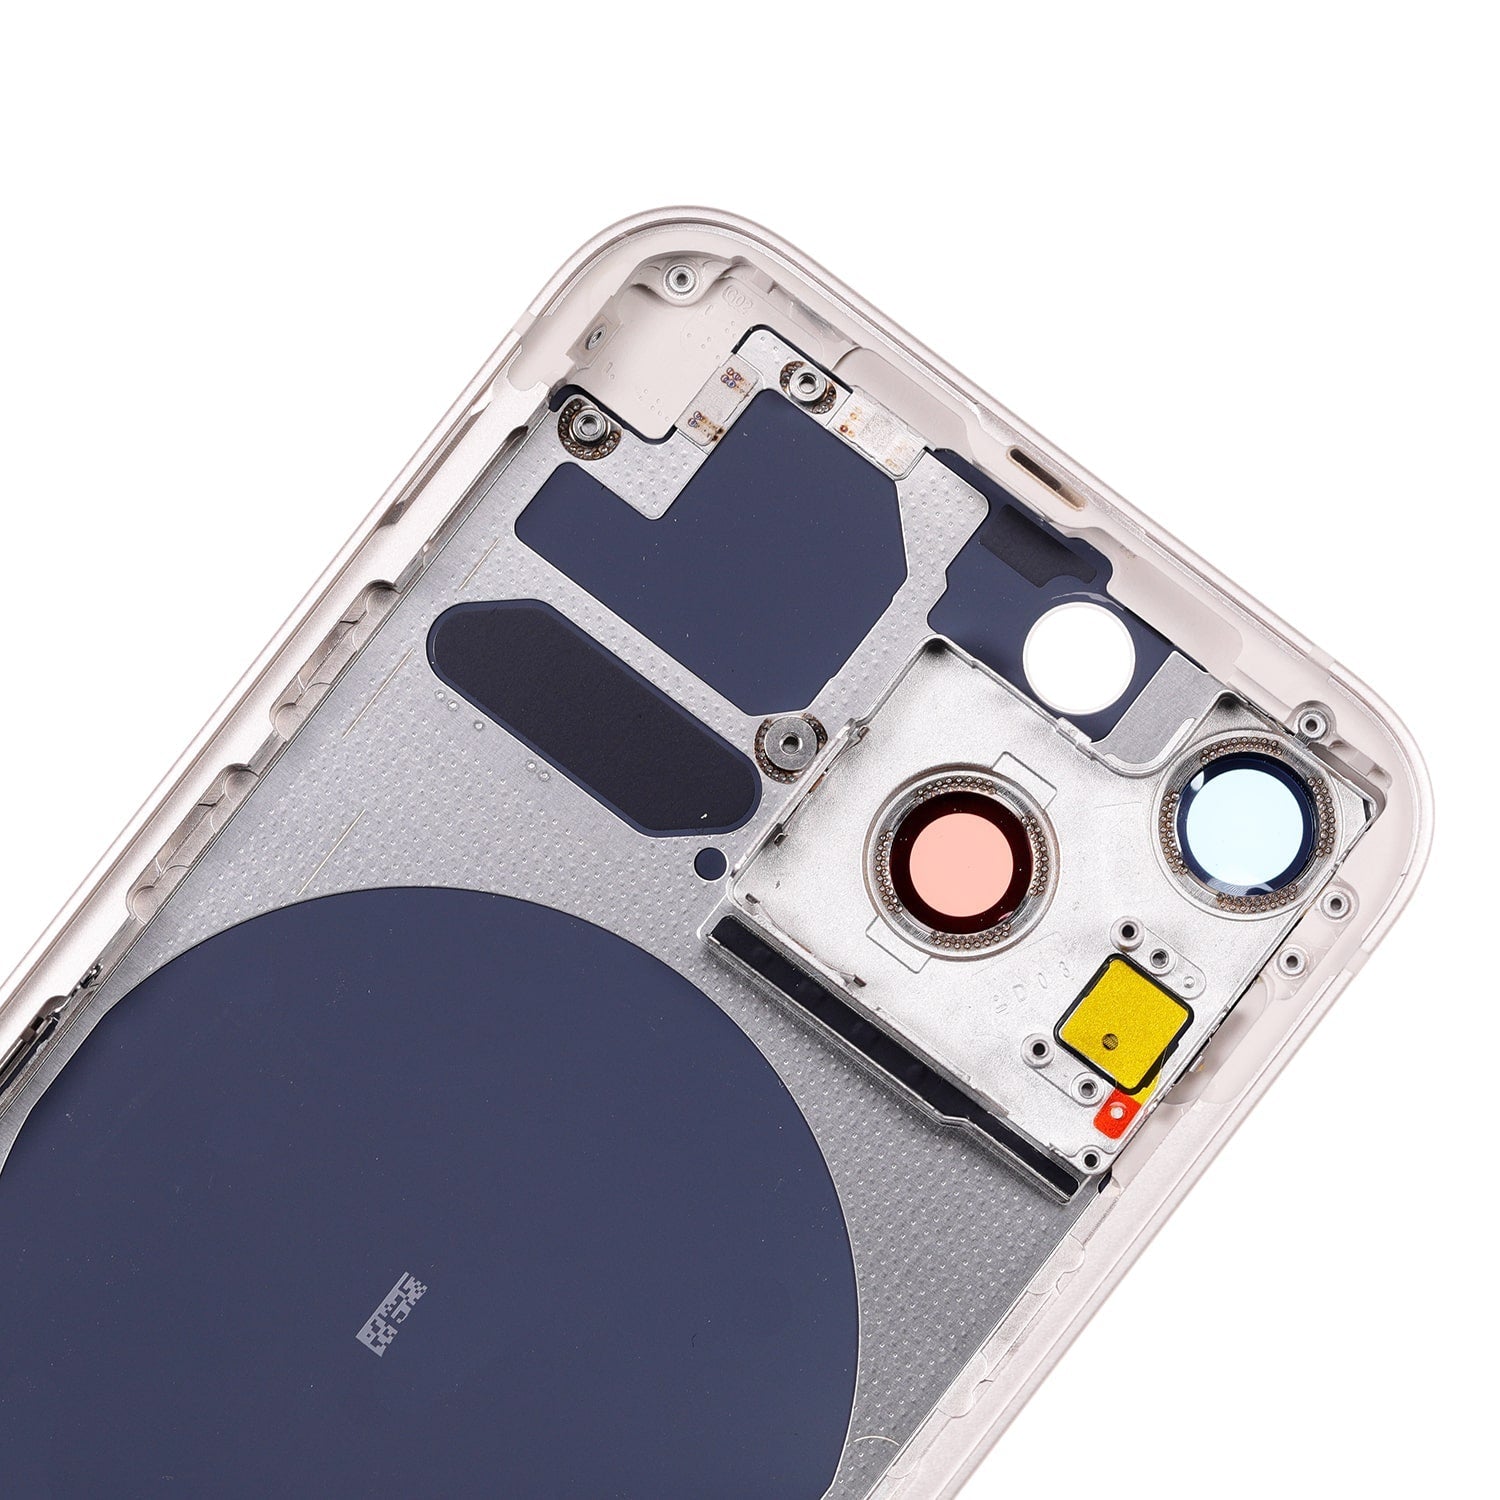 STARLIGHT REAR HOUSING WITH FRAME FOR IPHONE 13 MINI